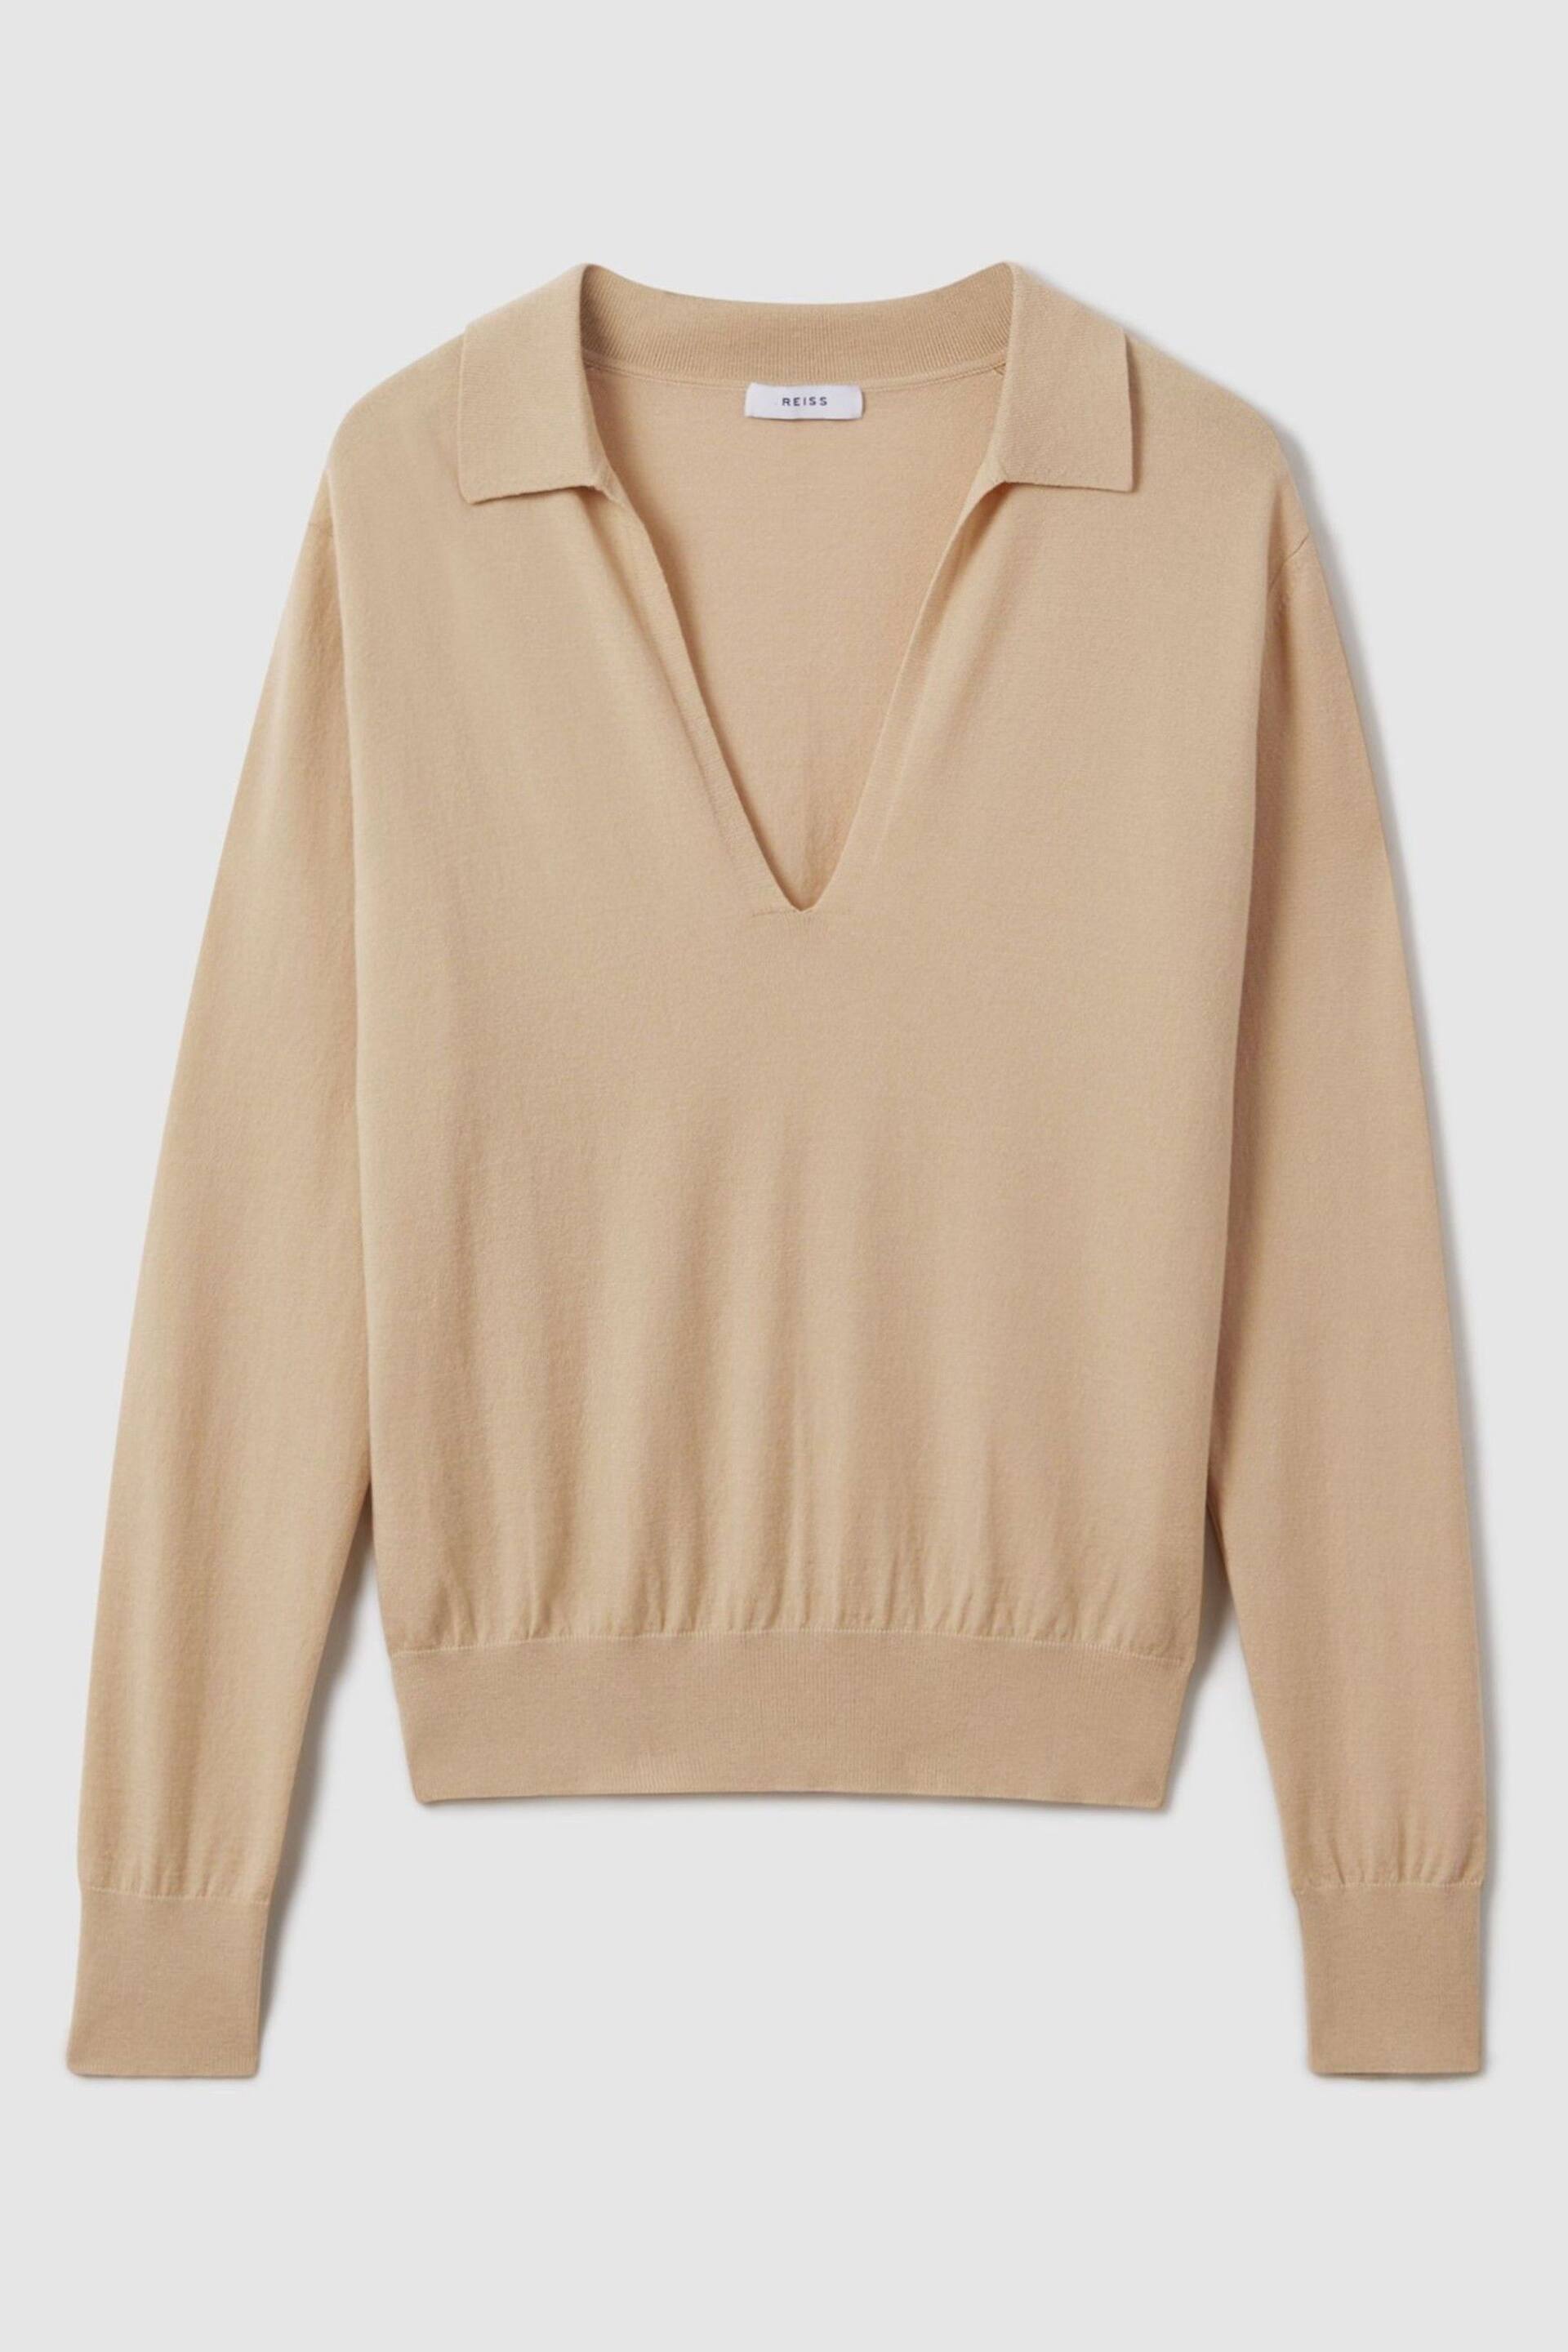 Reiss Stone Nellie Knitted Collared V-Neck Top - Image 2 of 5